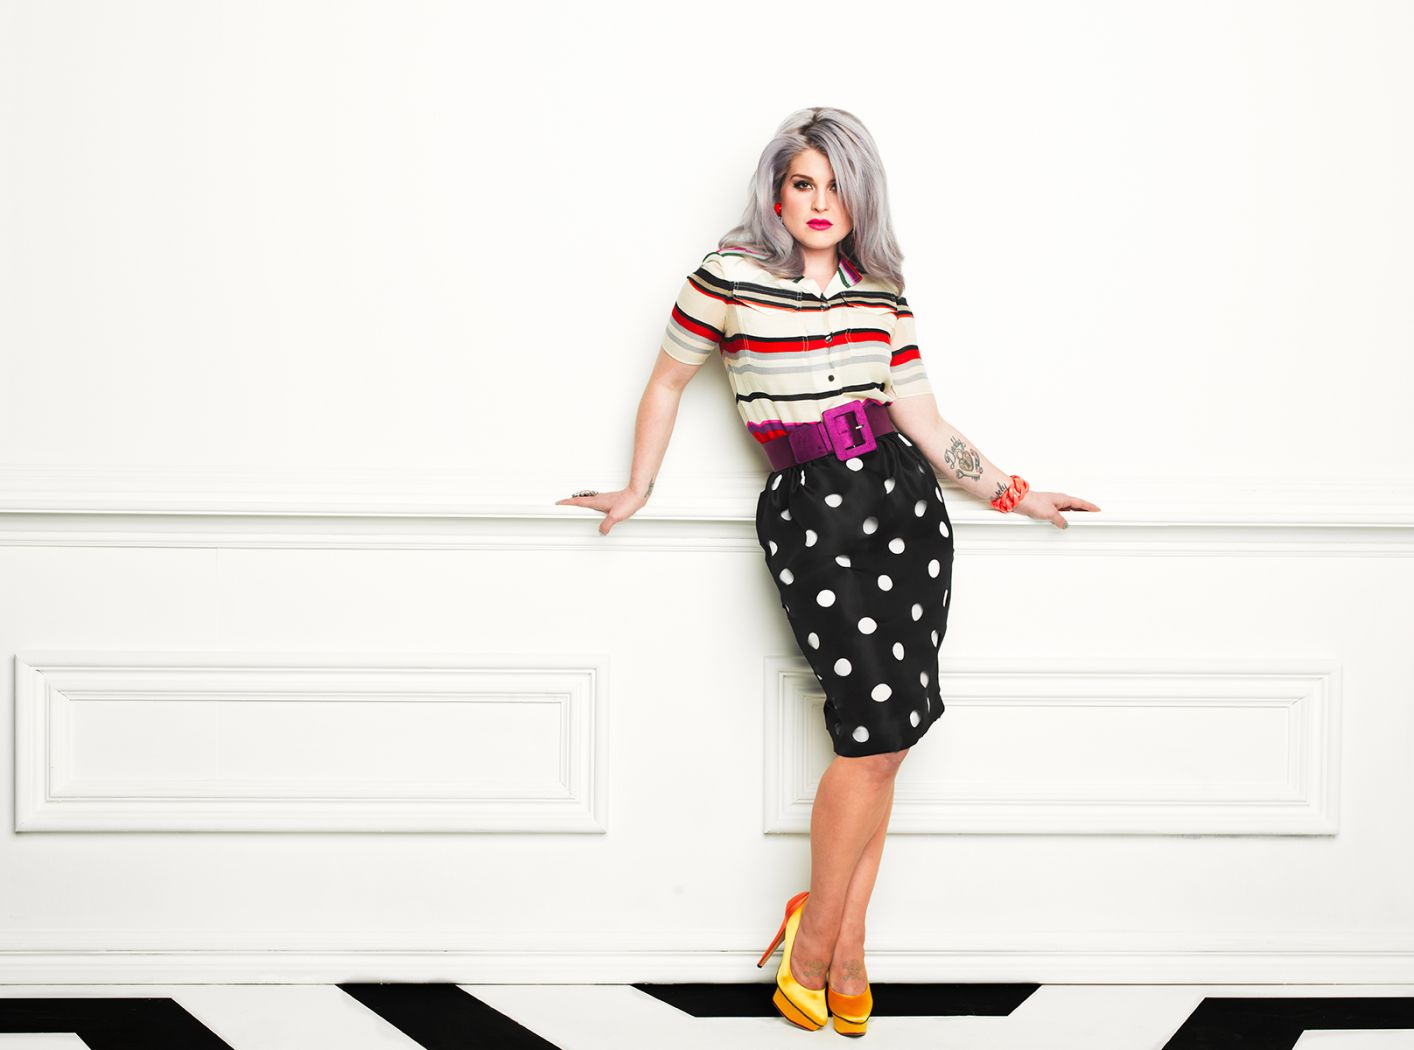 Kelly Osbourne by Timothy white, portrait of the musician in yellow pumps, black polkadot skirt, purple belt and striped shirt, leaning on a wall